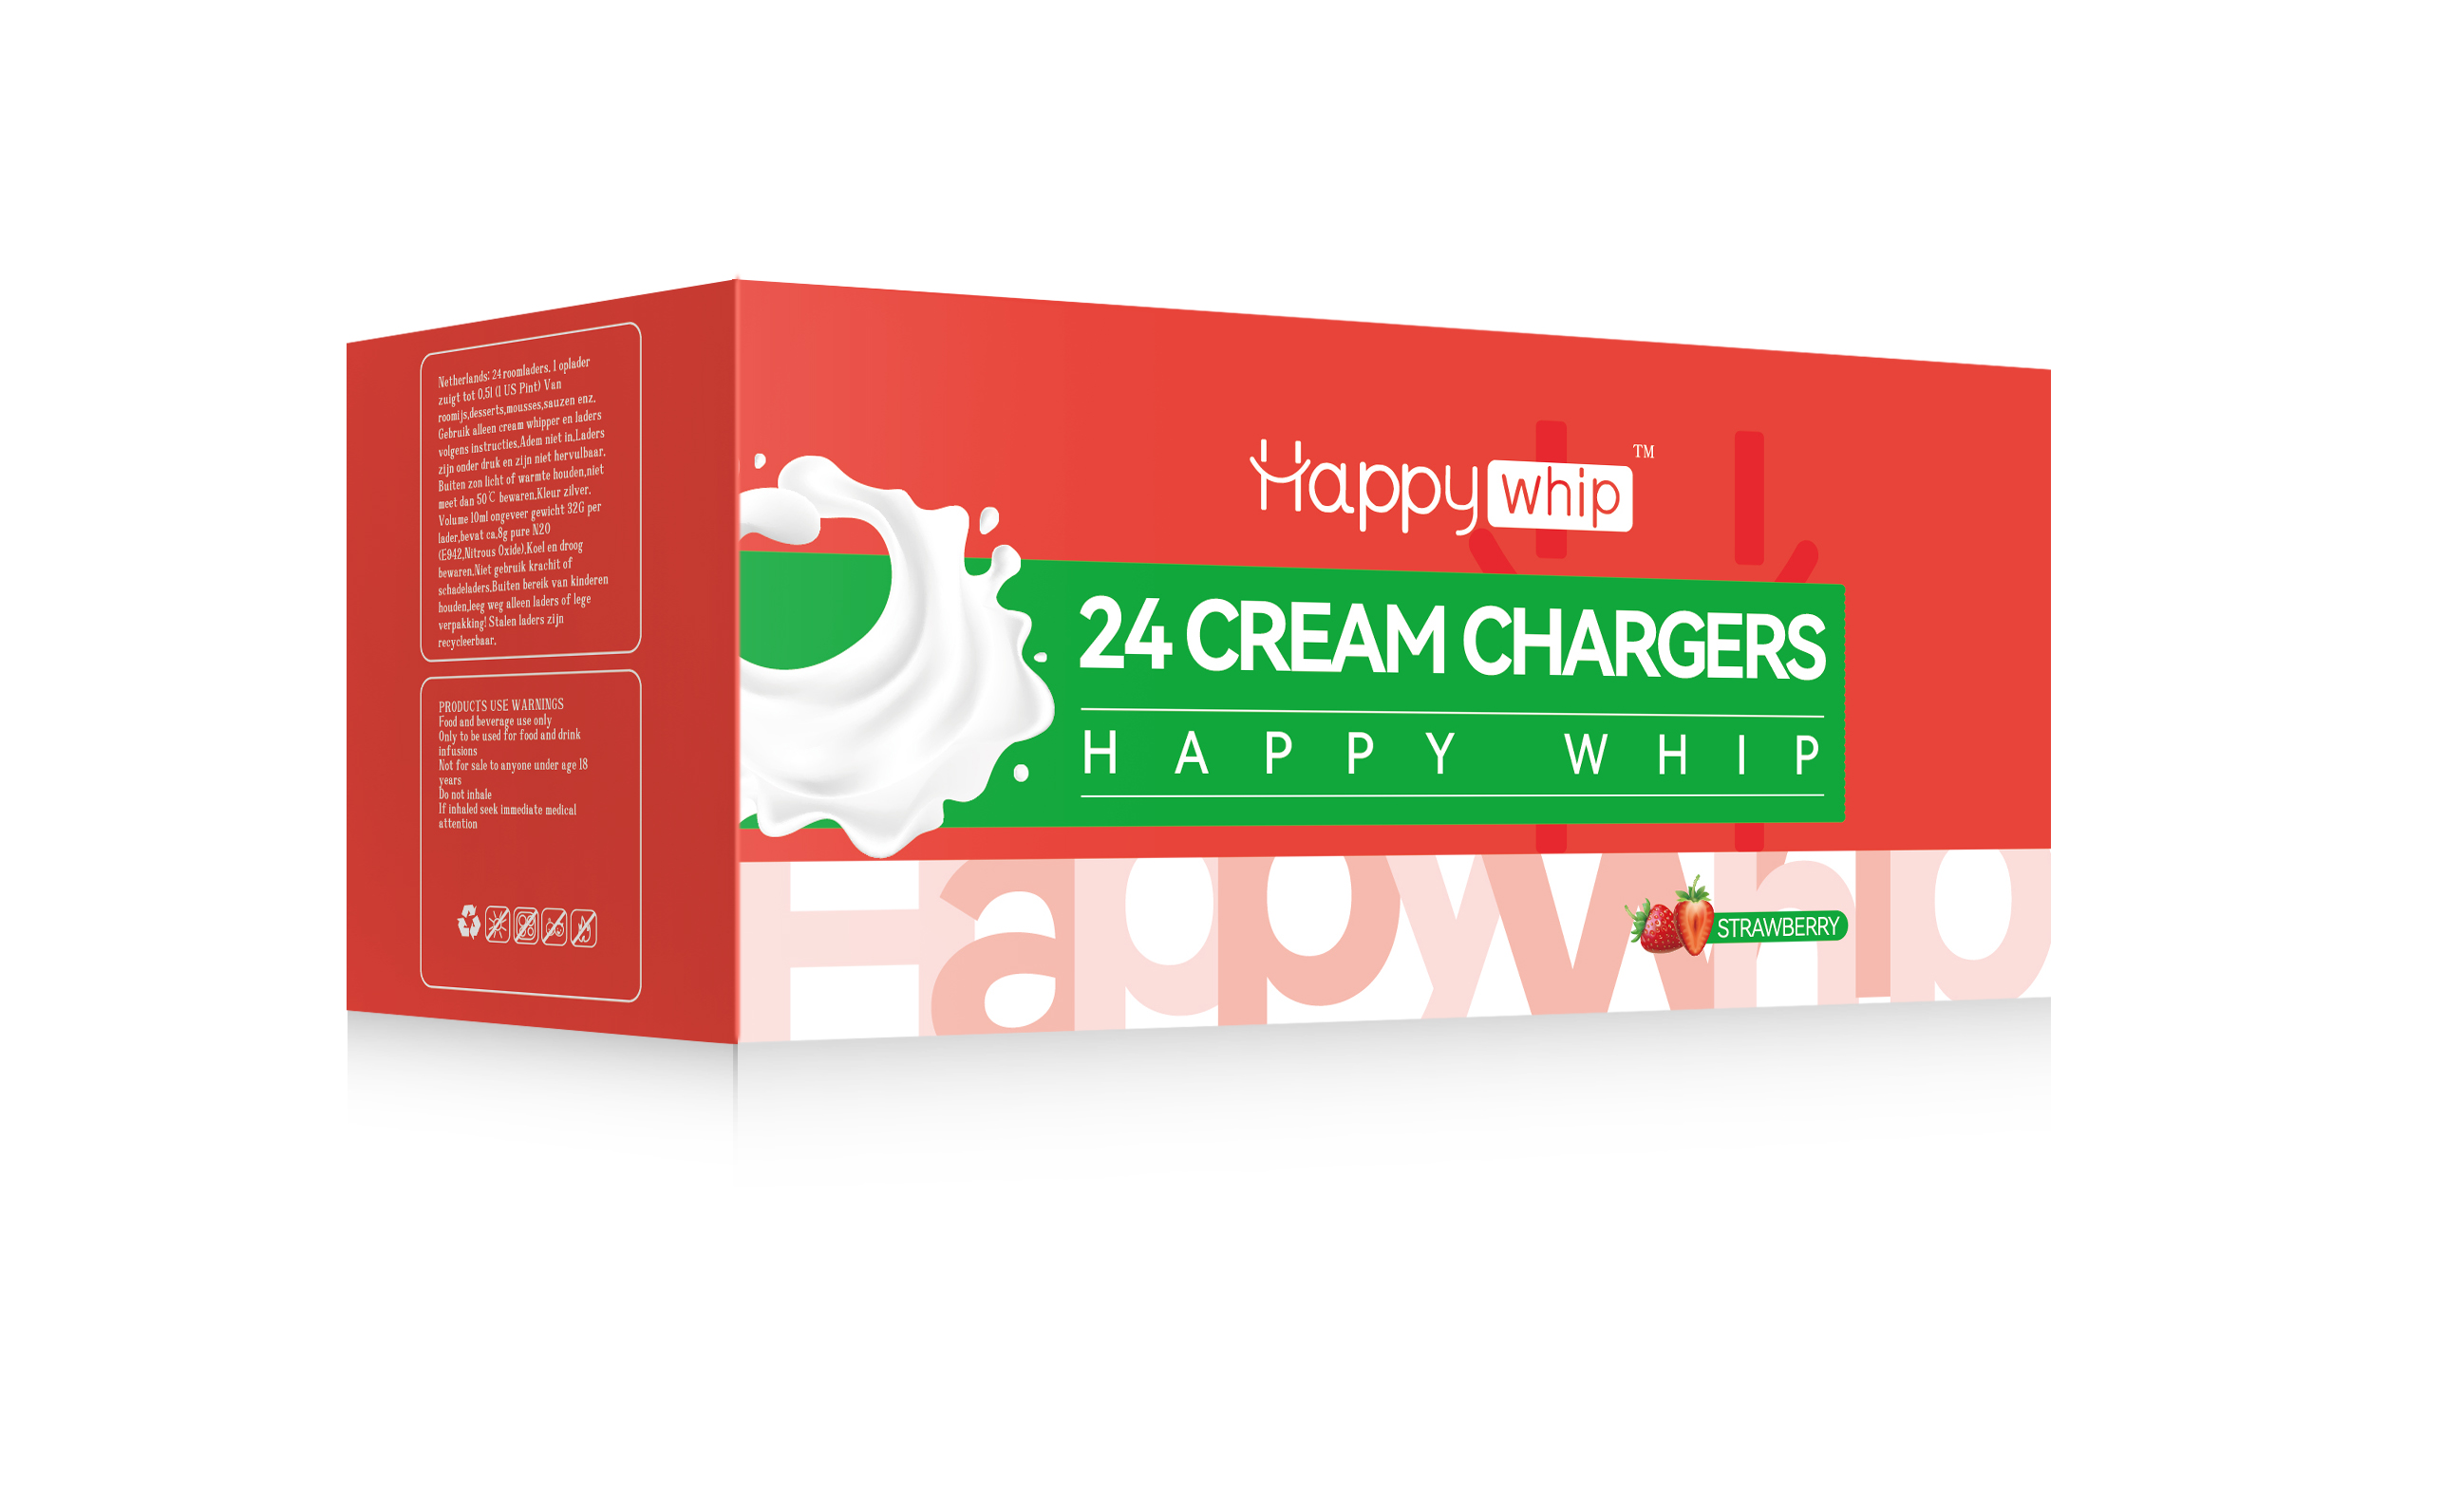 What you should know when use the N2O cream chargers for food?